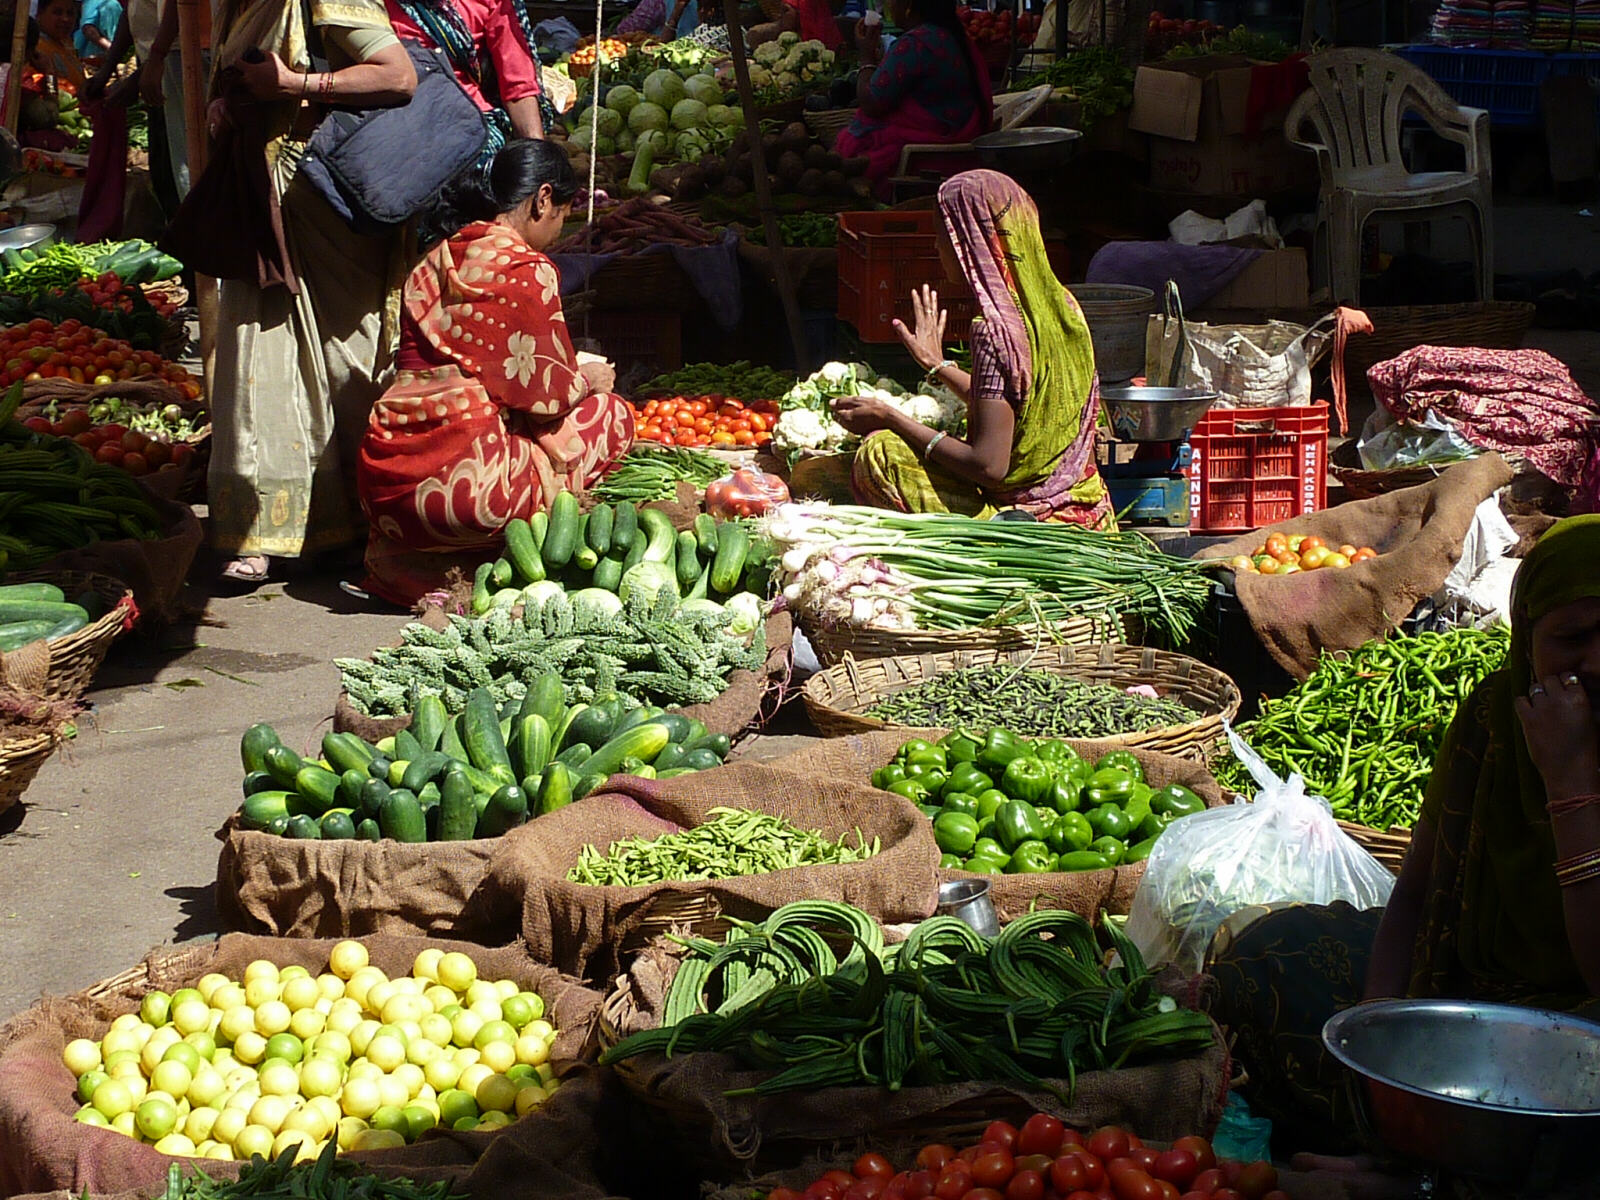 The vegetable market in Udaipur, Rajasthan, India